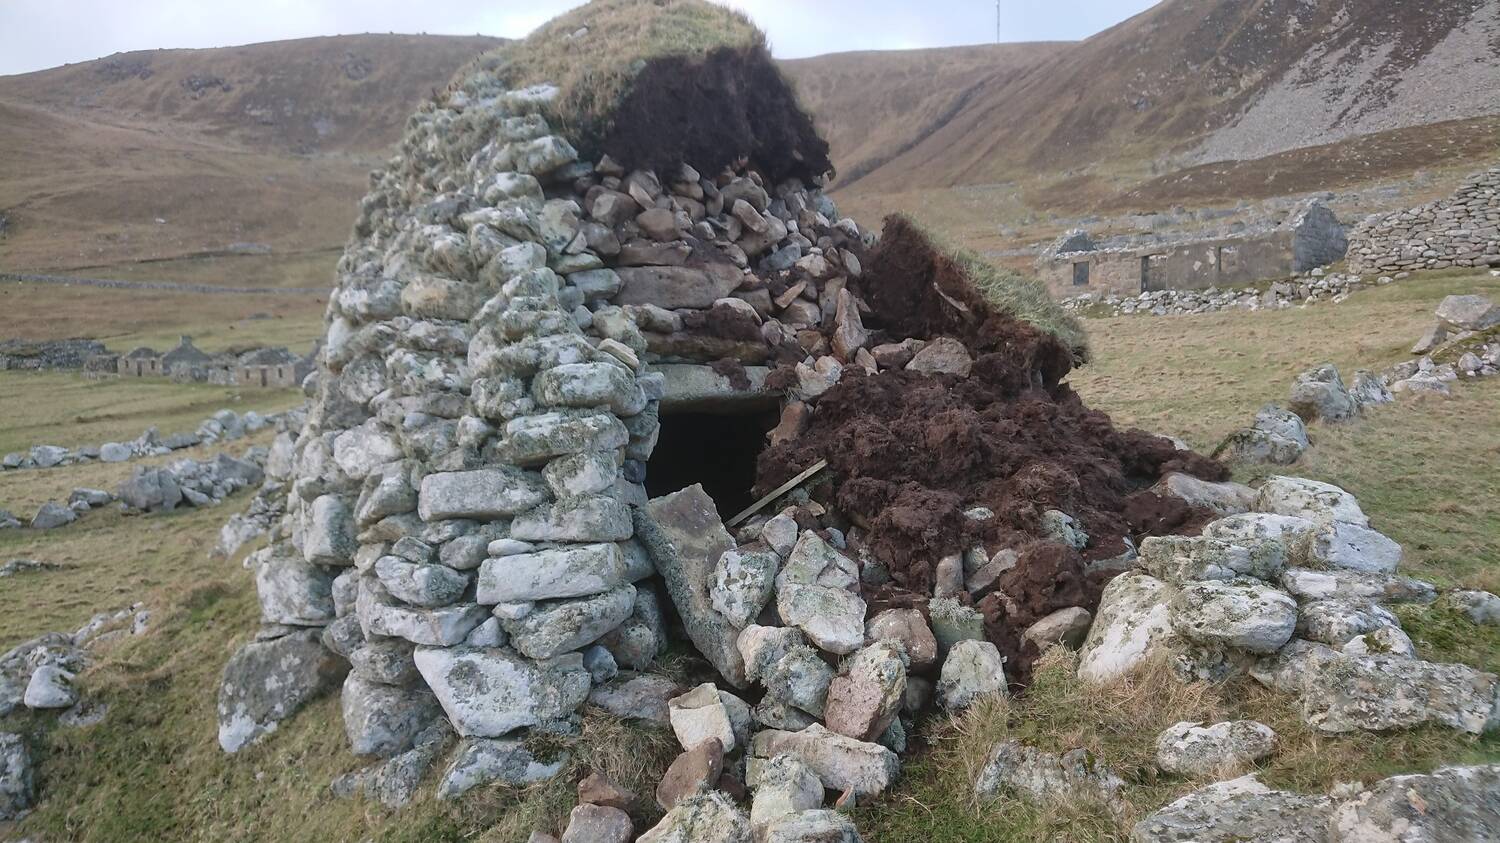 A stone structure with turf roof. Some of the stones are lying around next to the structure. 